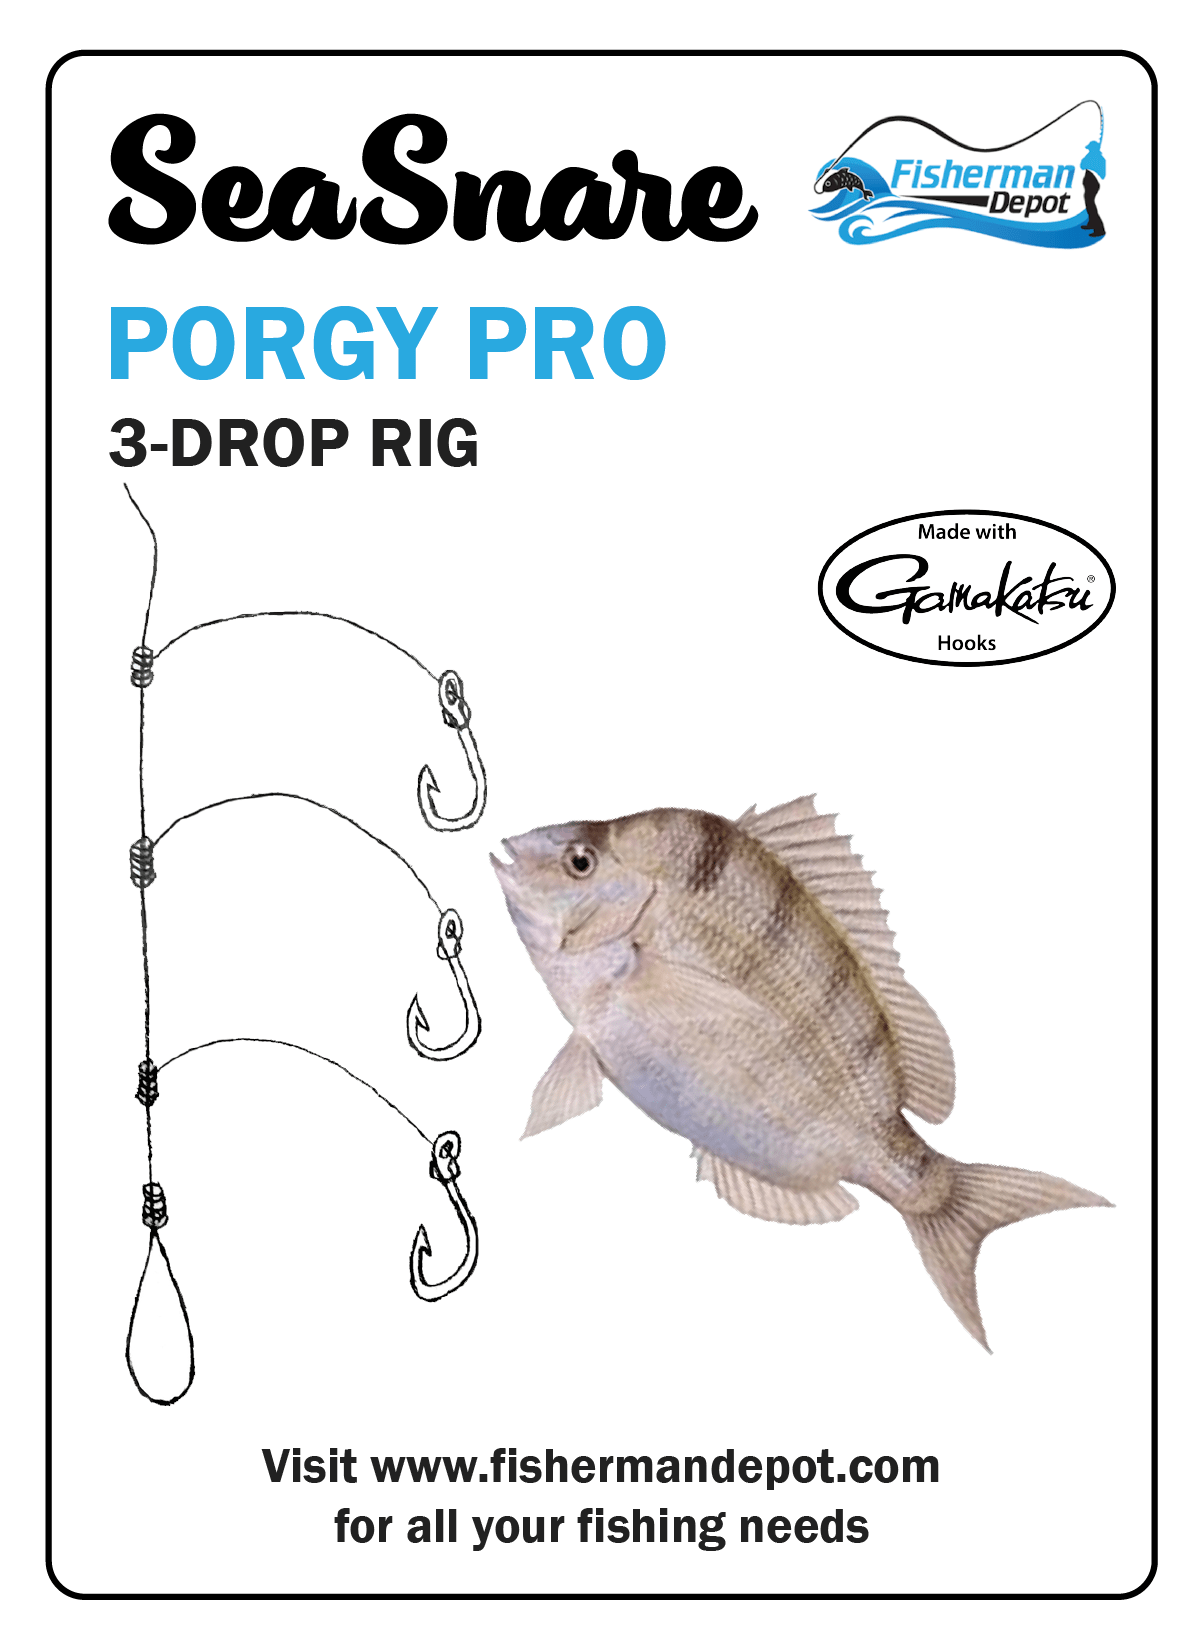 SeaSnare - Porgy Pro 3-Drop Rig Pack